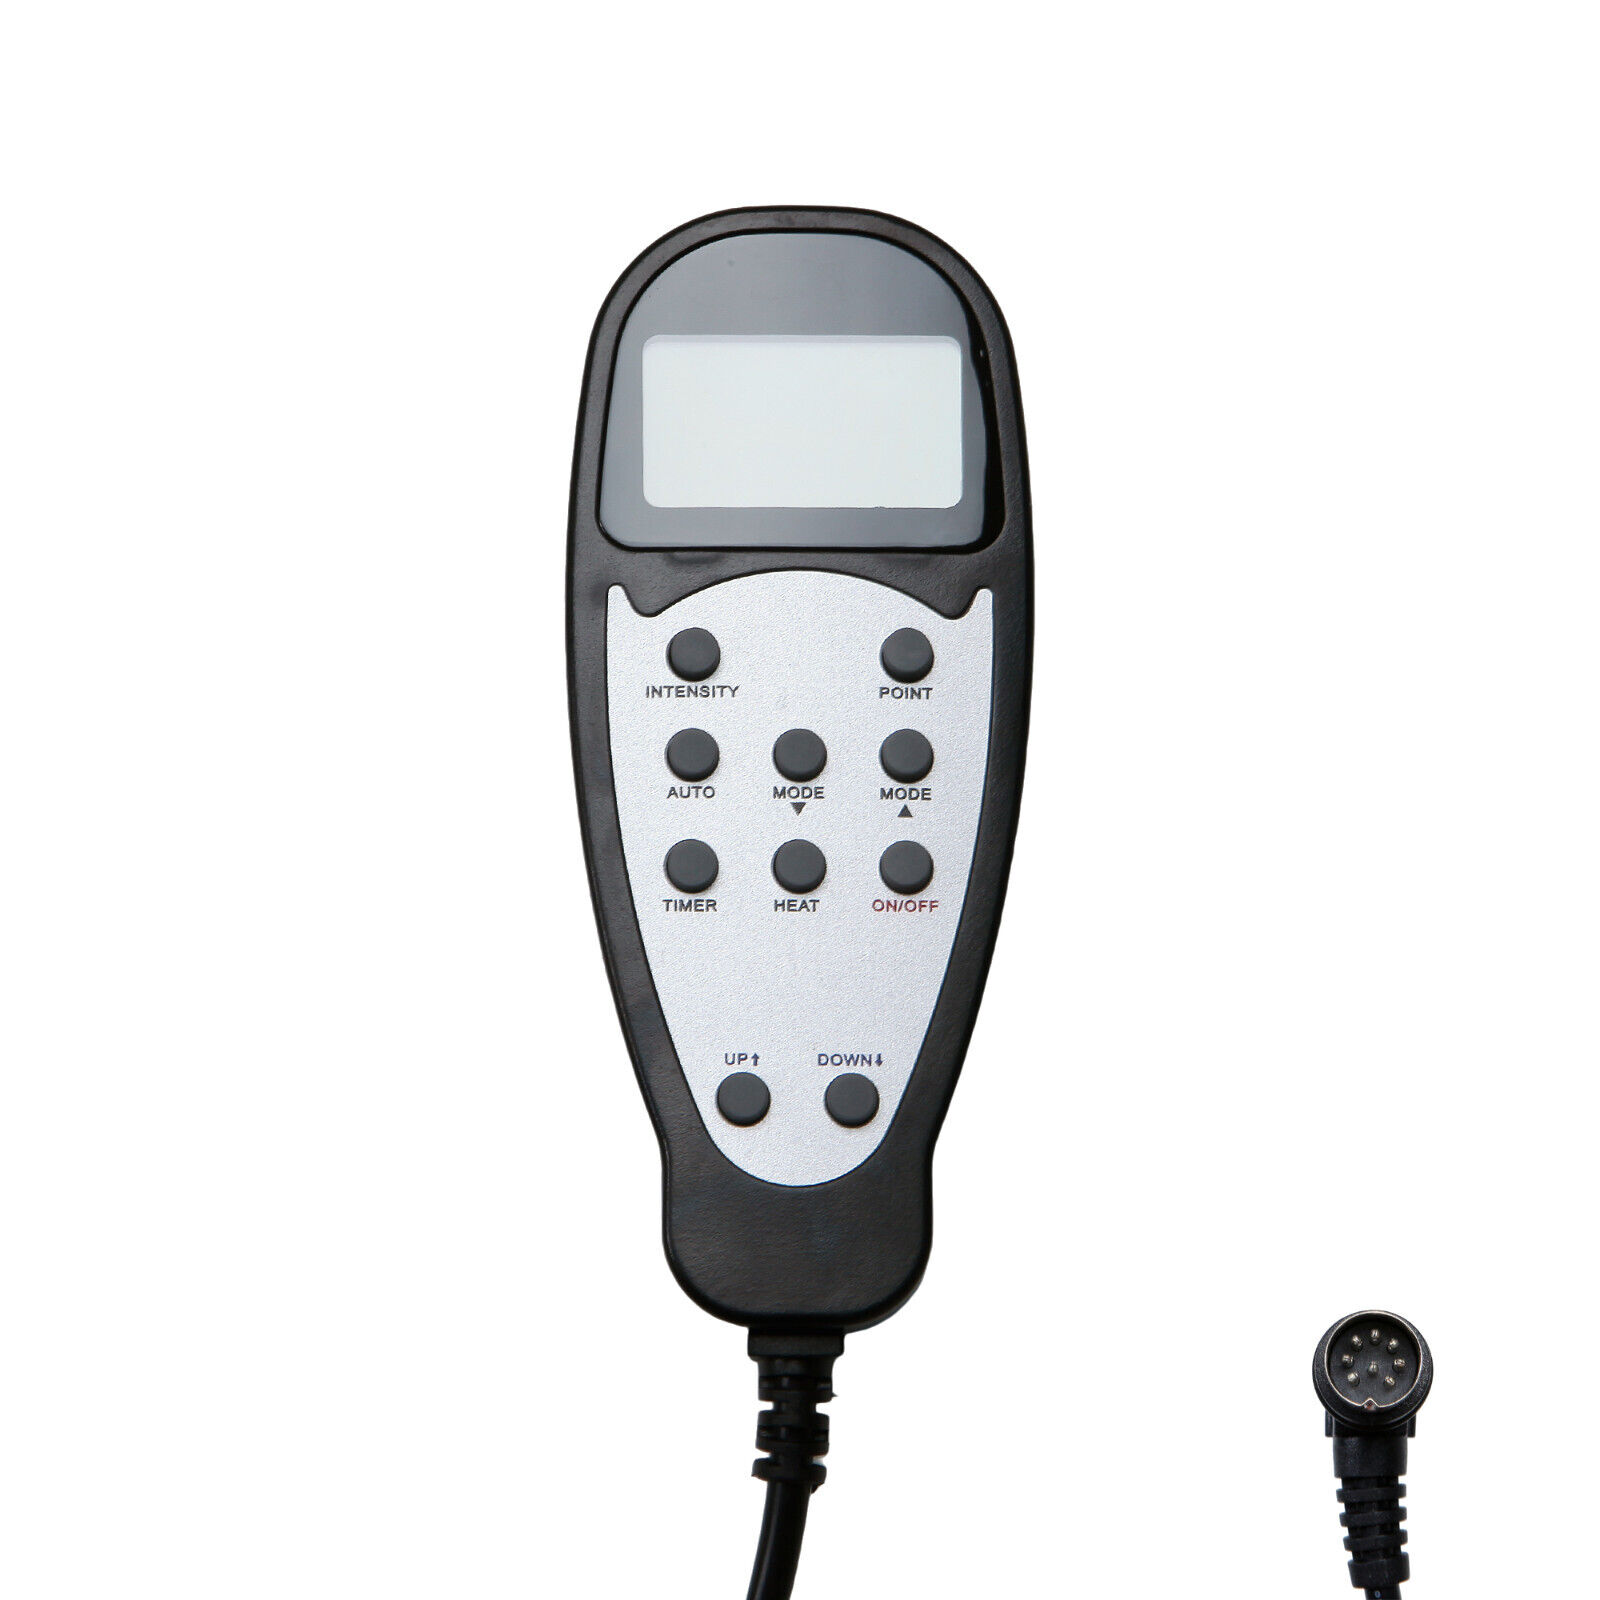 Emomo 8 Pin Massage Remote Control Model NHX03 for Power Recliner Lift Chairs